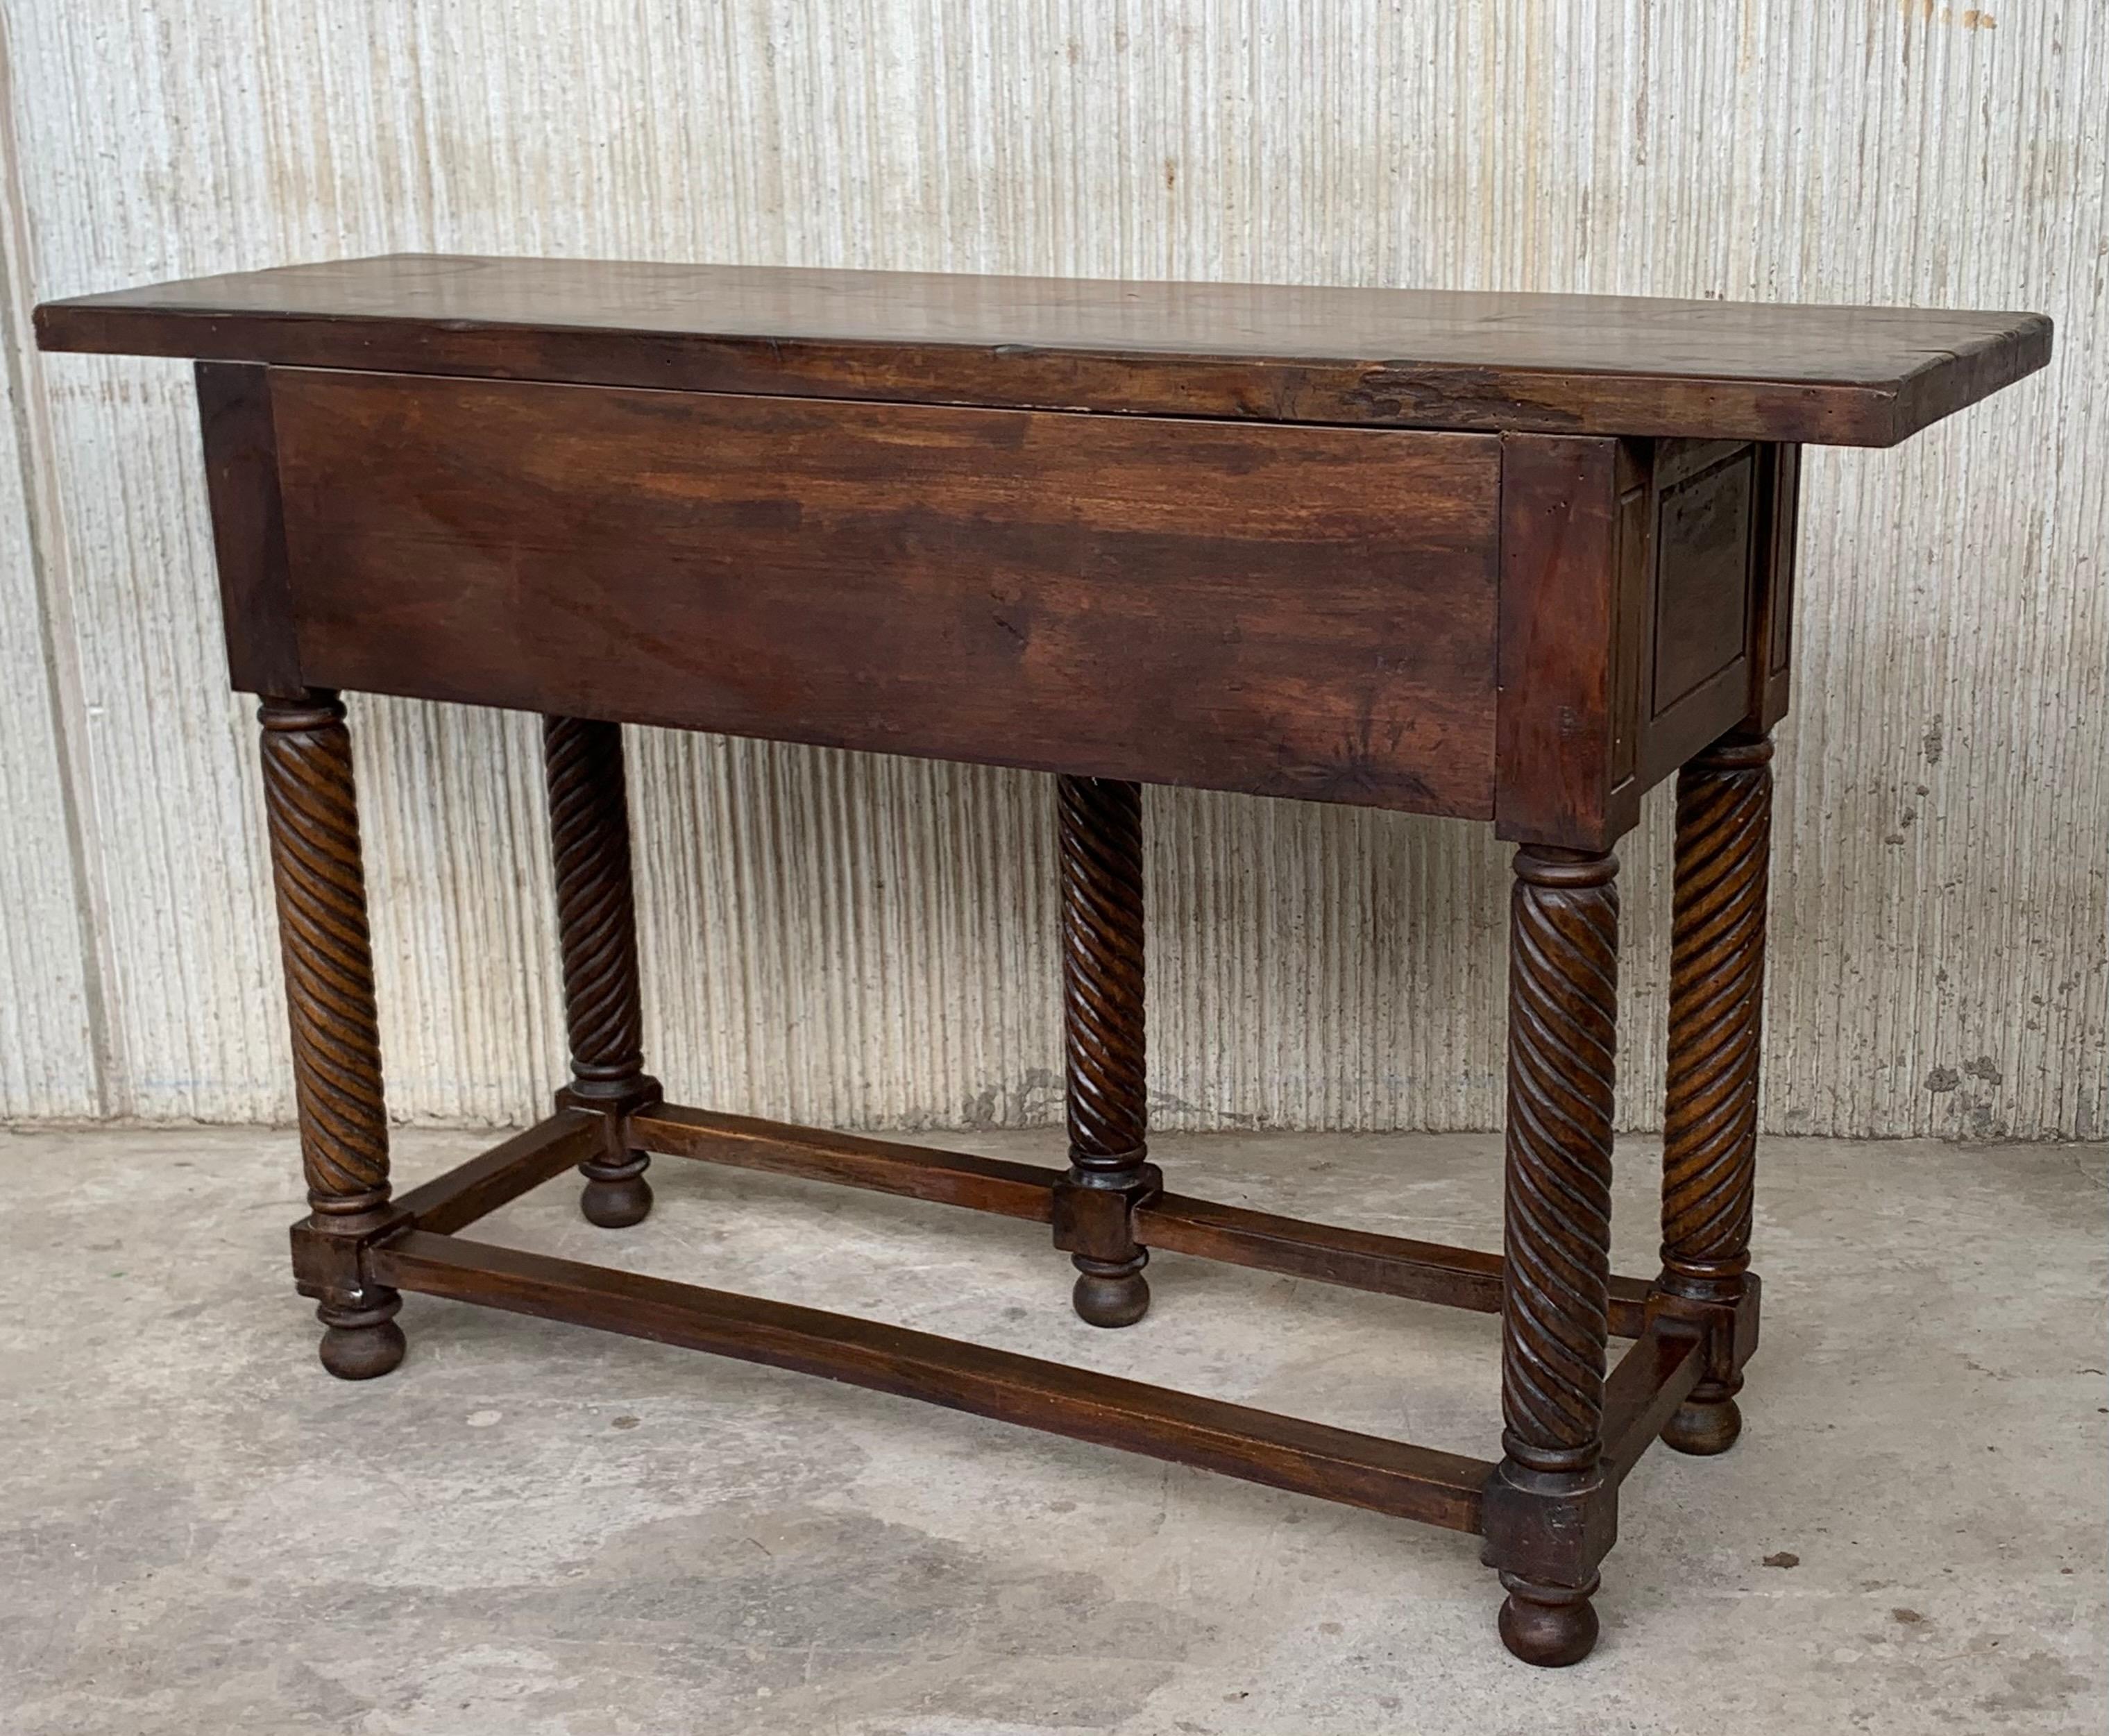 19th Century Spanish Tuscan Console Table with Two Drawers and Solomonic Legs 1